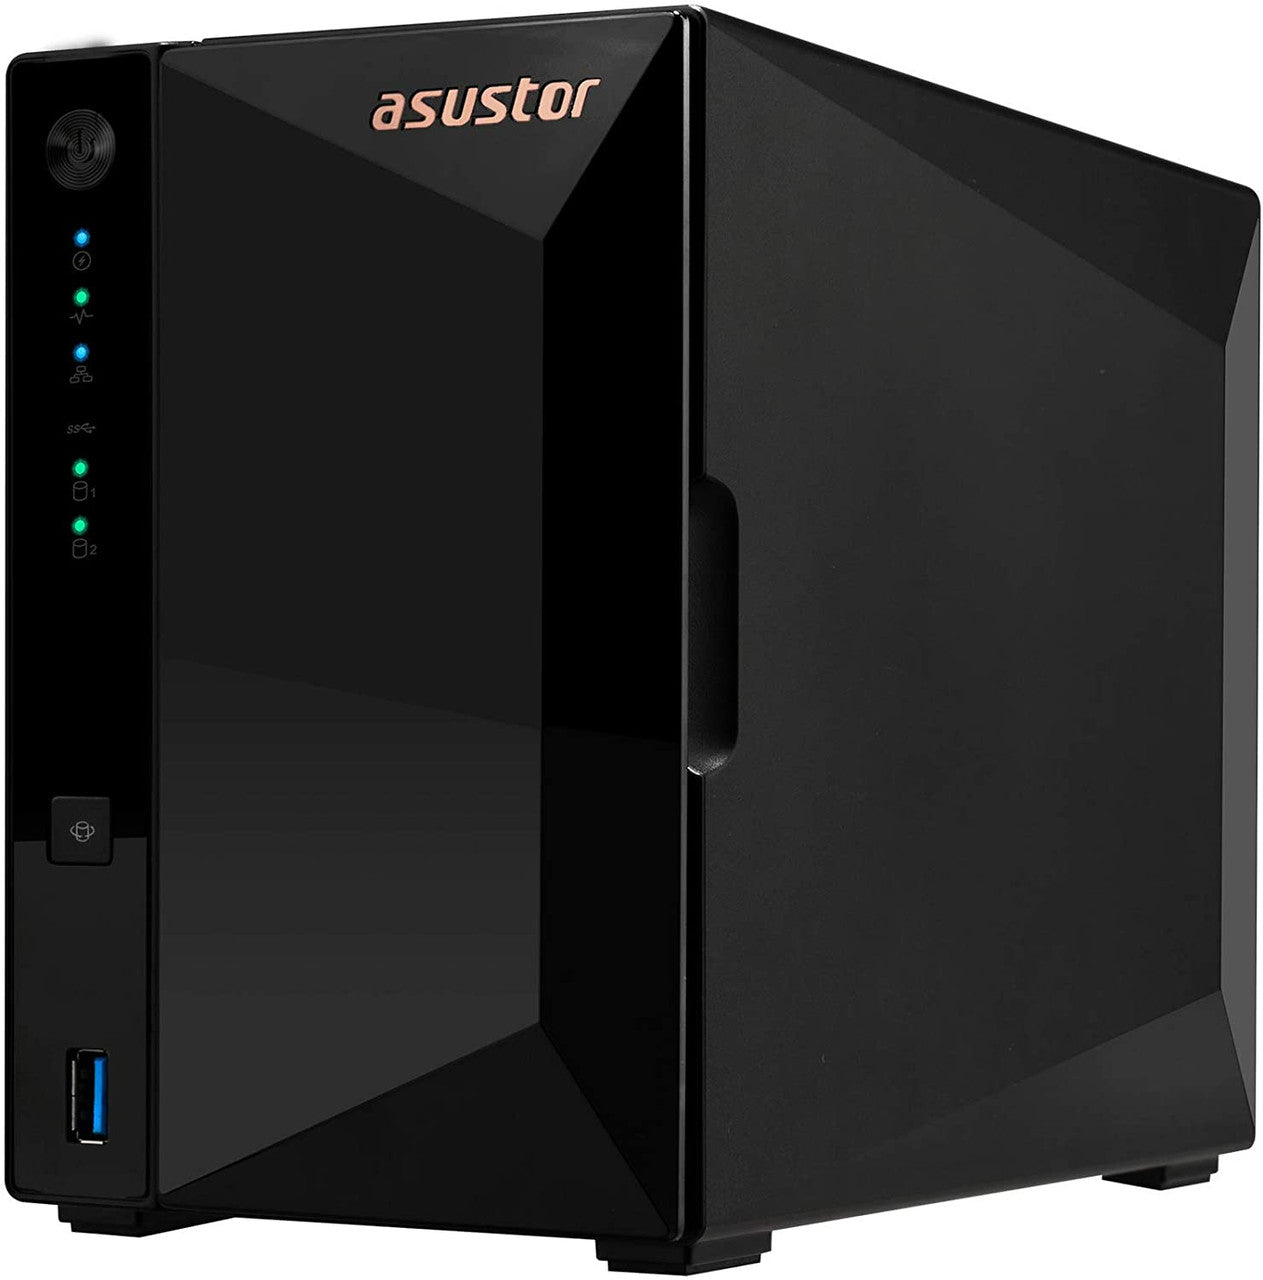 Asustor AS3302T 2-Bay Drivestor 2 PRO NAS with 2GB RAM and 12TB (2x6TB) Seagate Ironwolf NAS Drives Fully Assembled and Tested